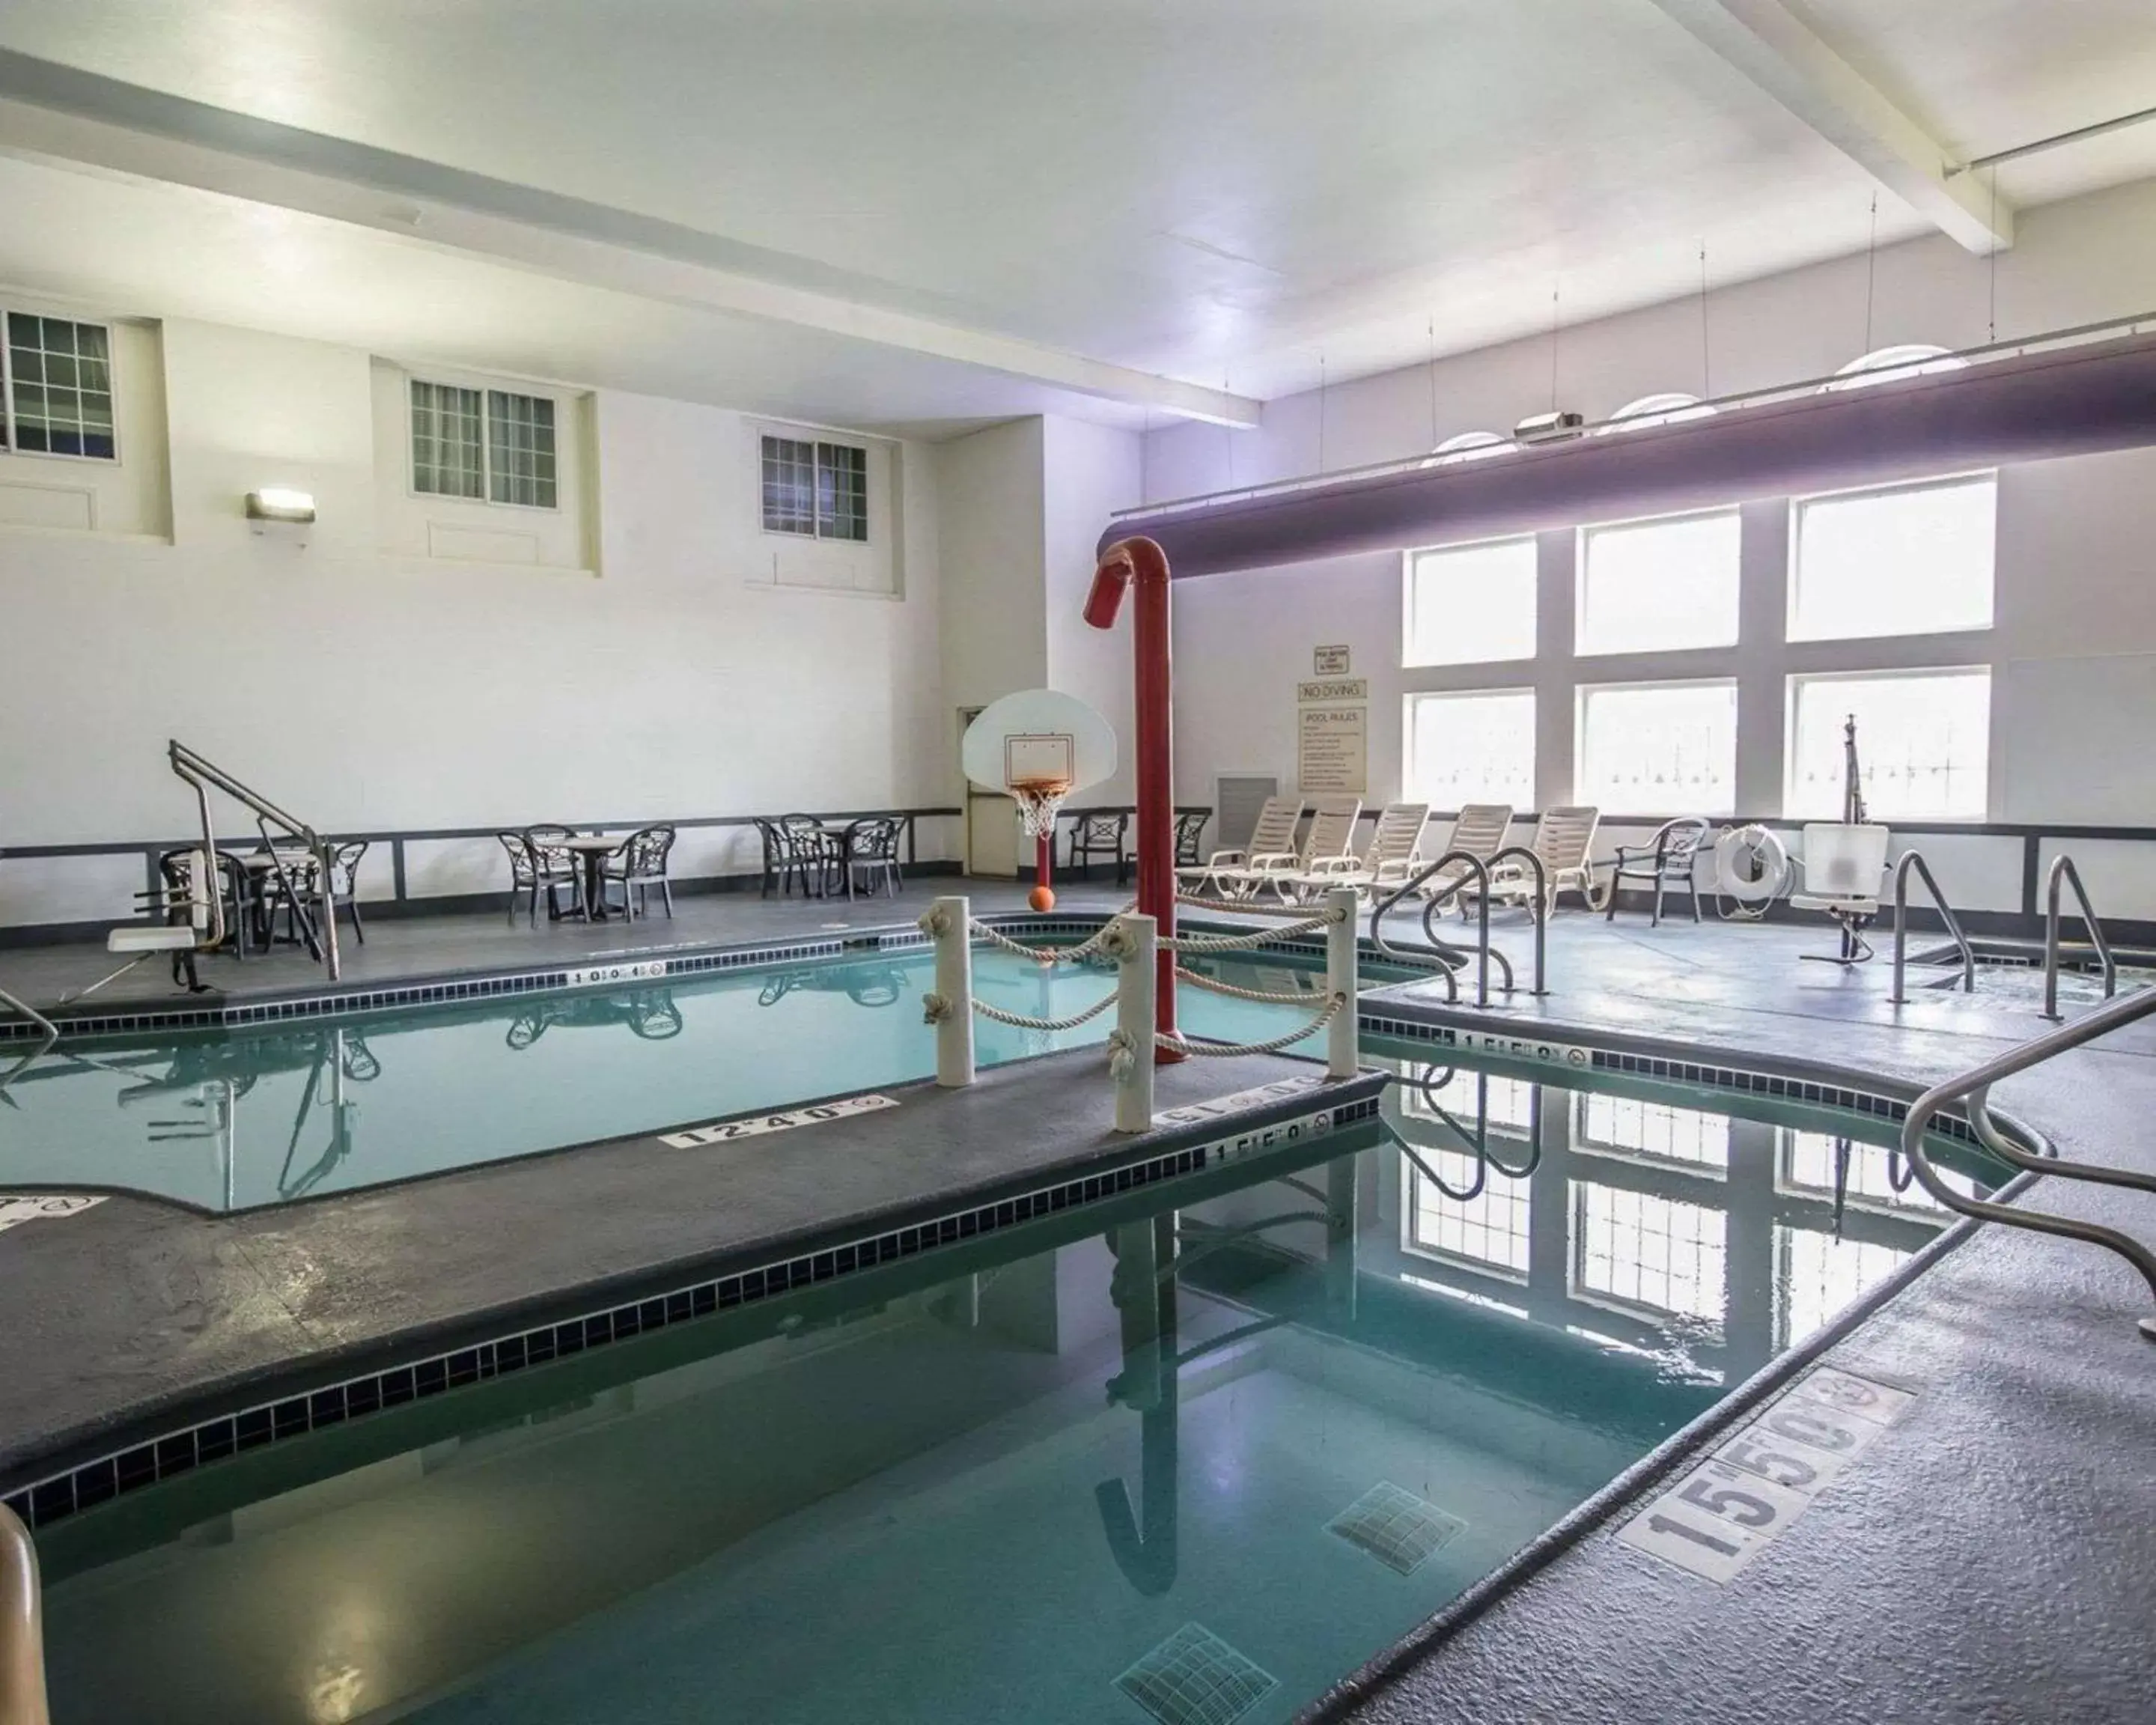 On site, Swimming Pool in Quality Inn & Suites Dixon near I-88